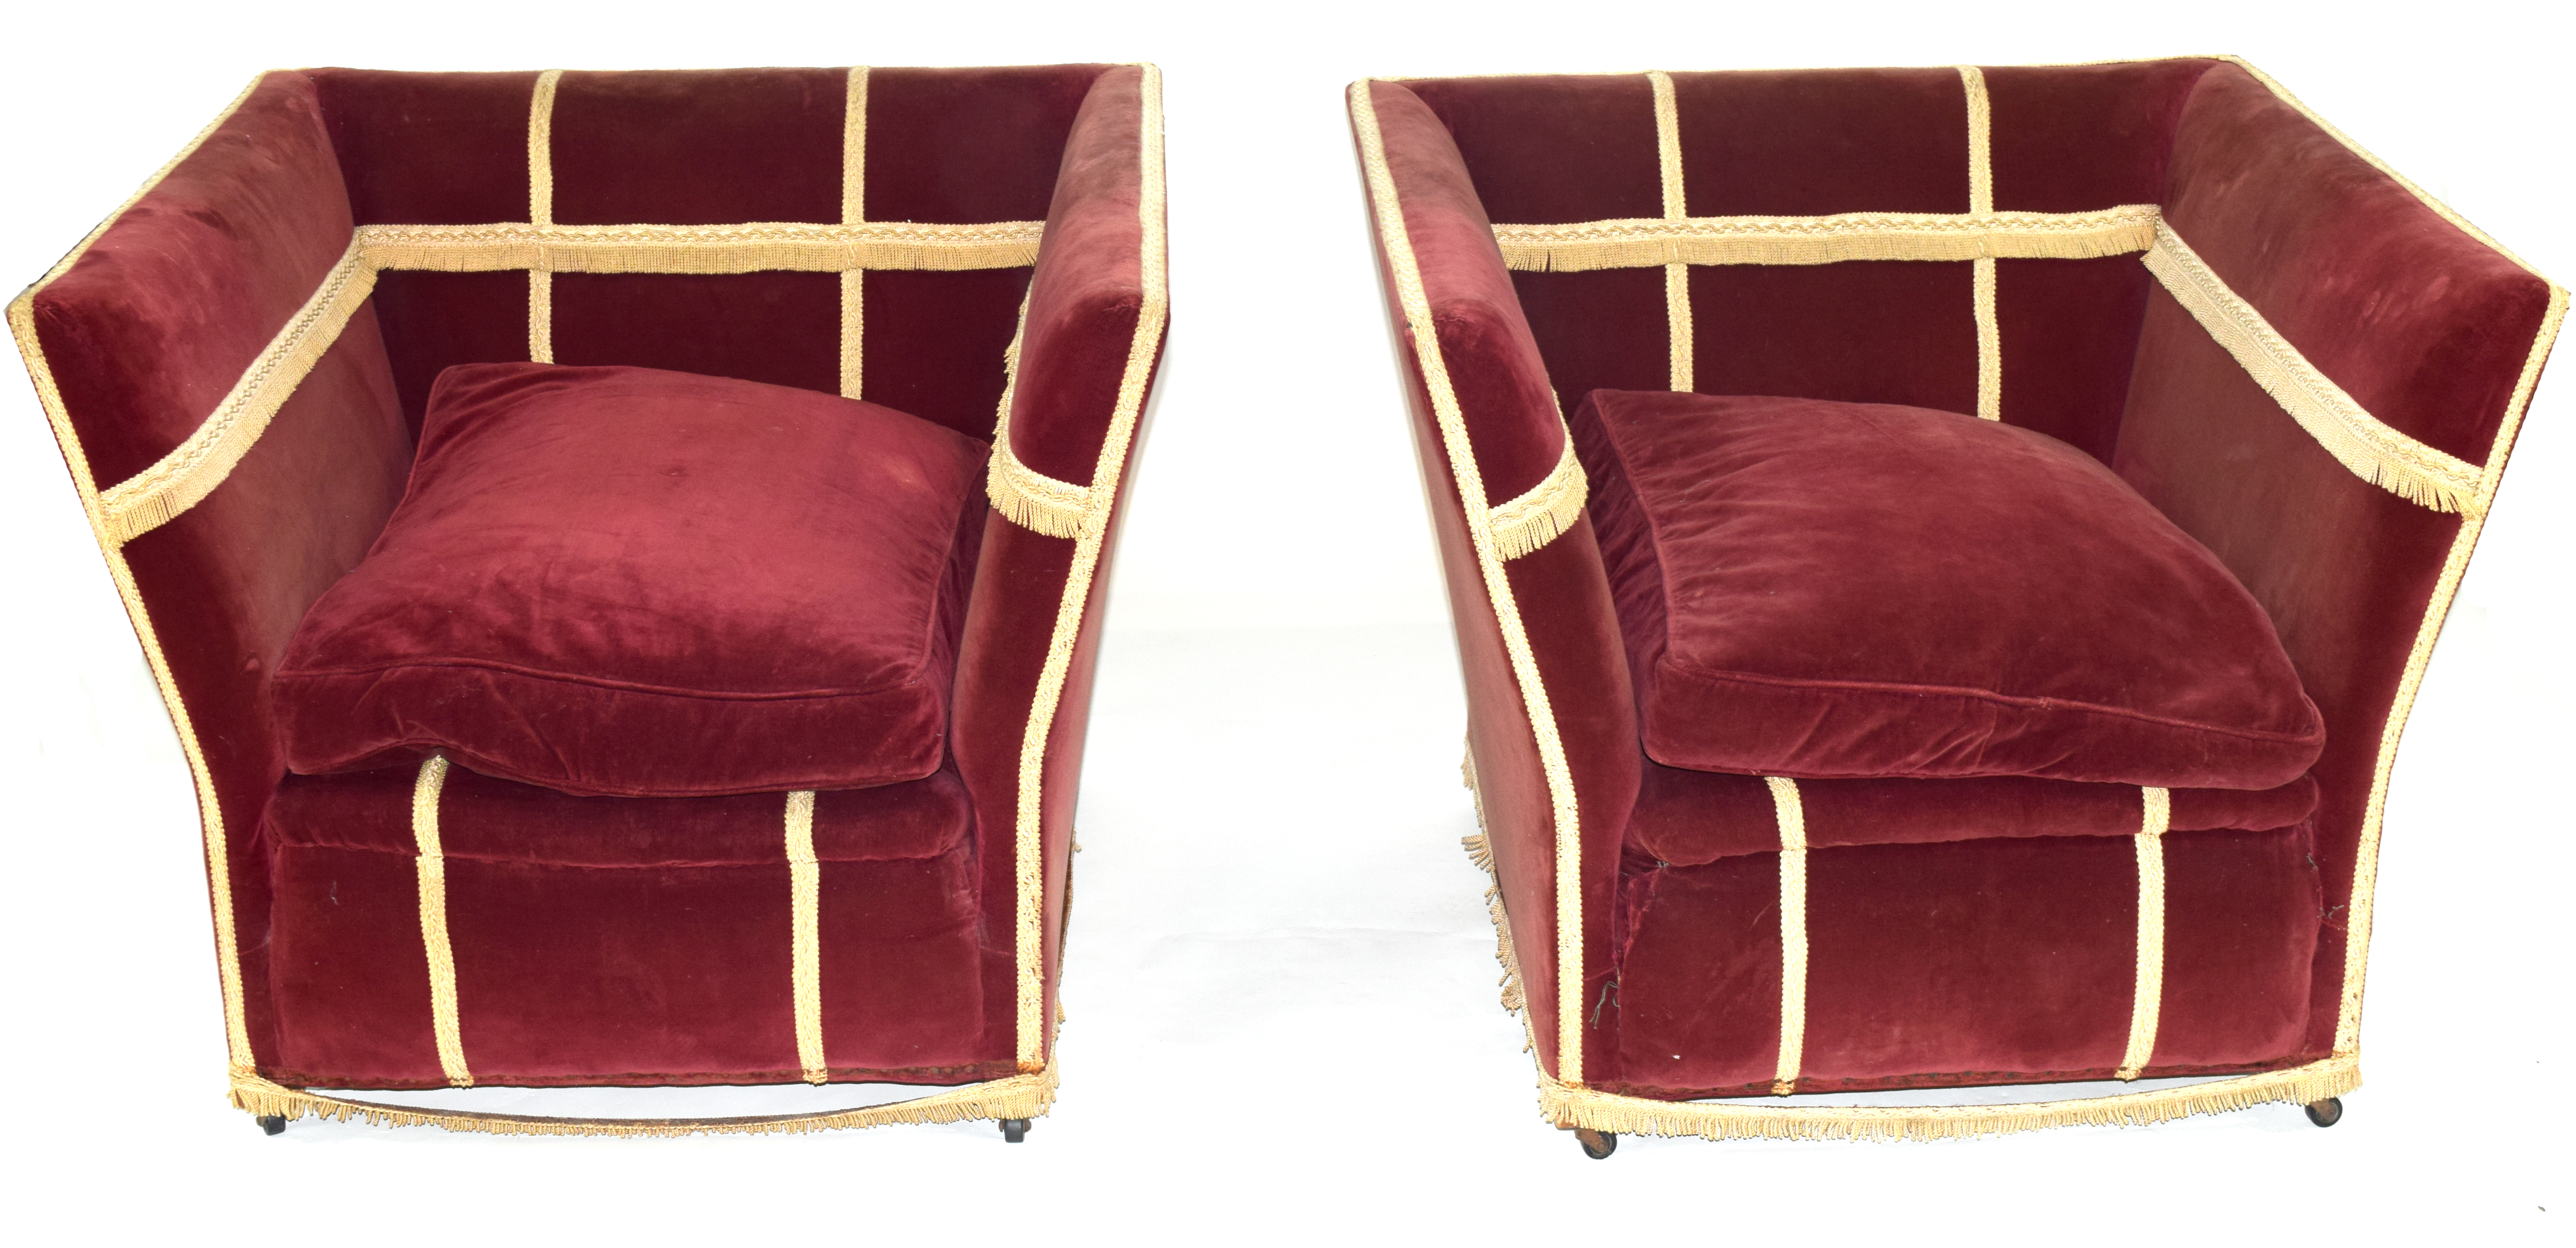 Early 20th century drop end Knole style two-seater sofa and pair of accompanying chairs, upholstered